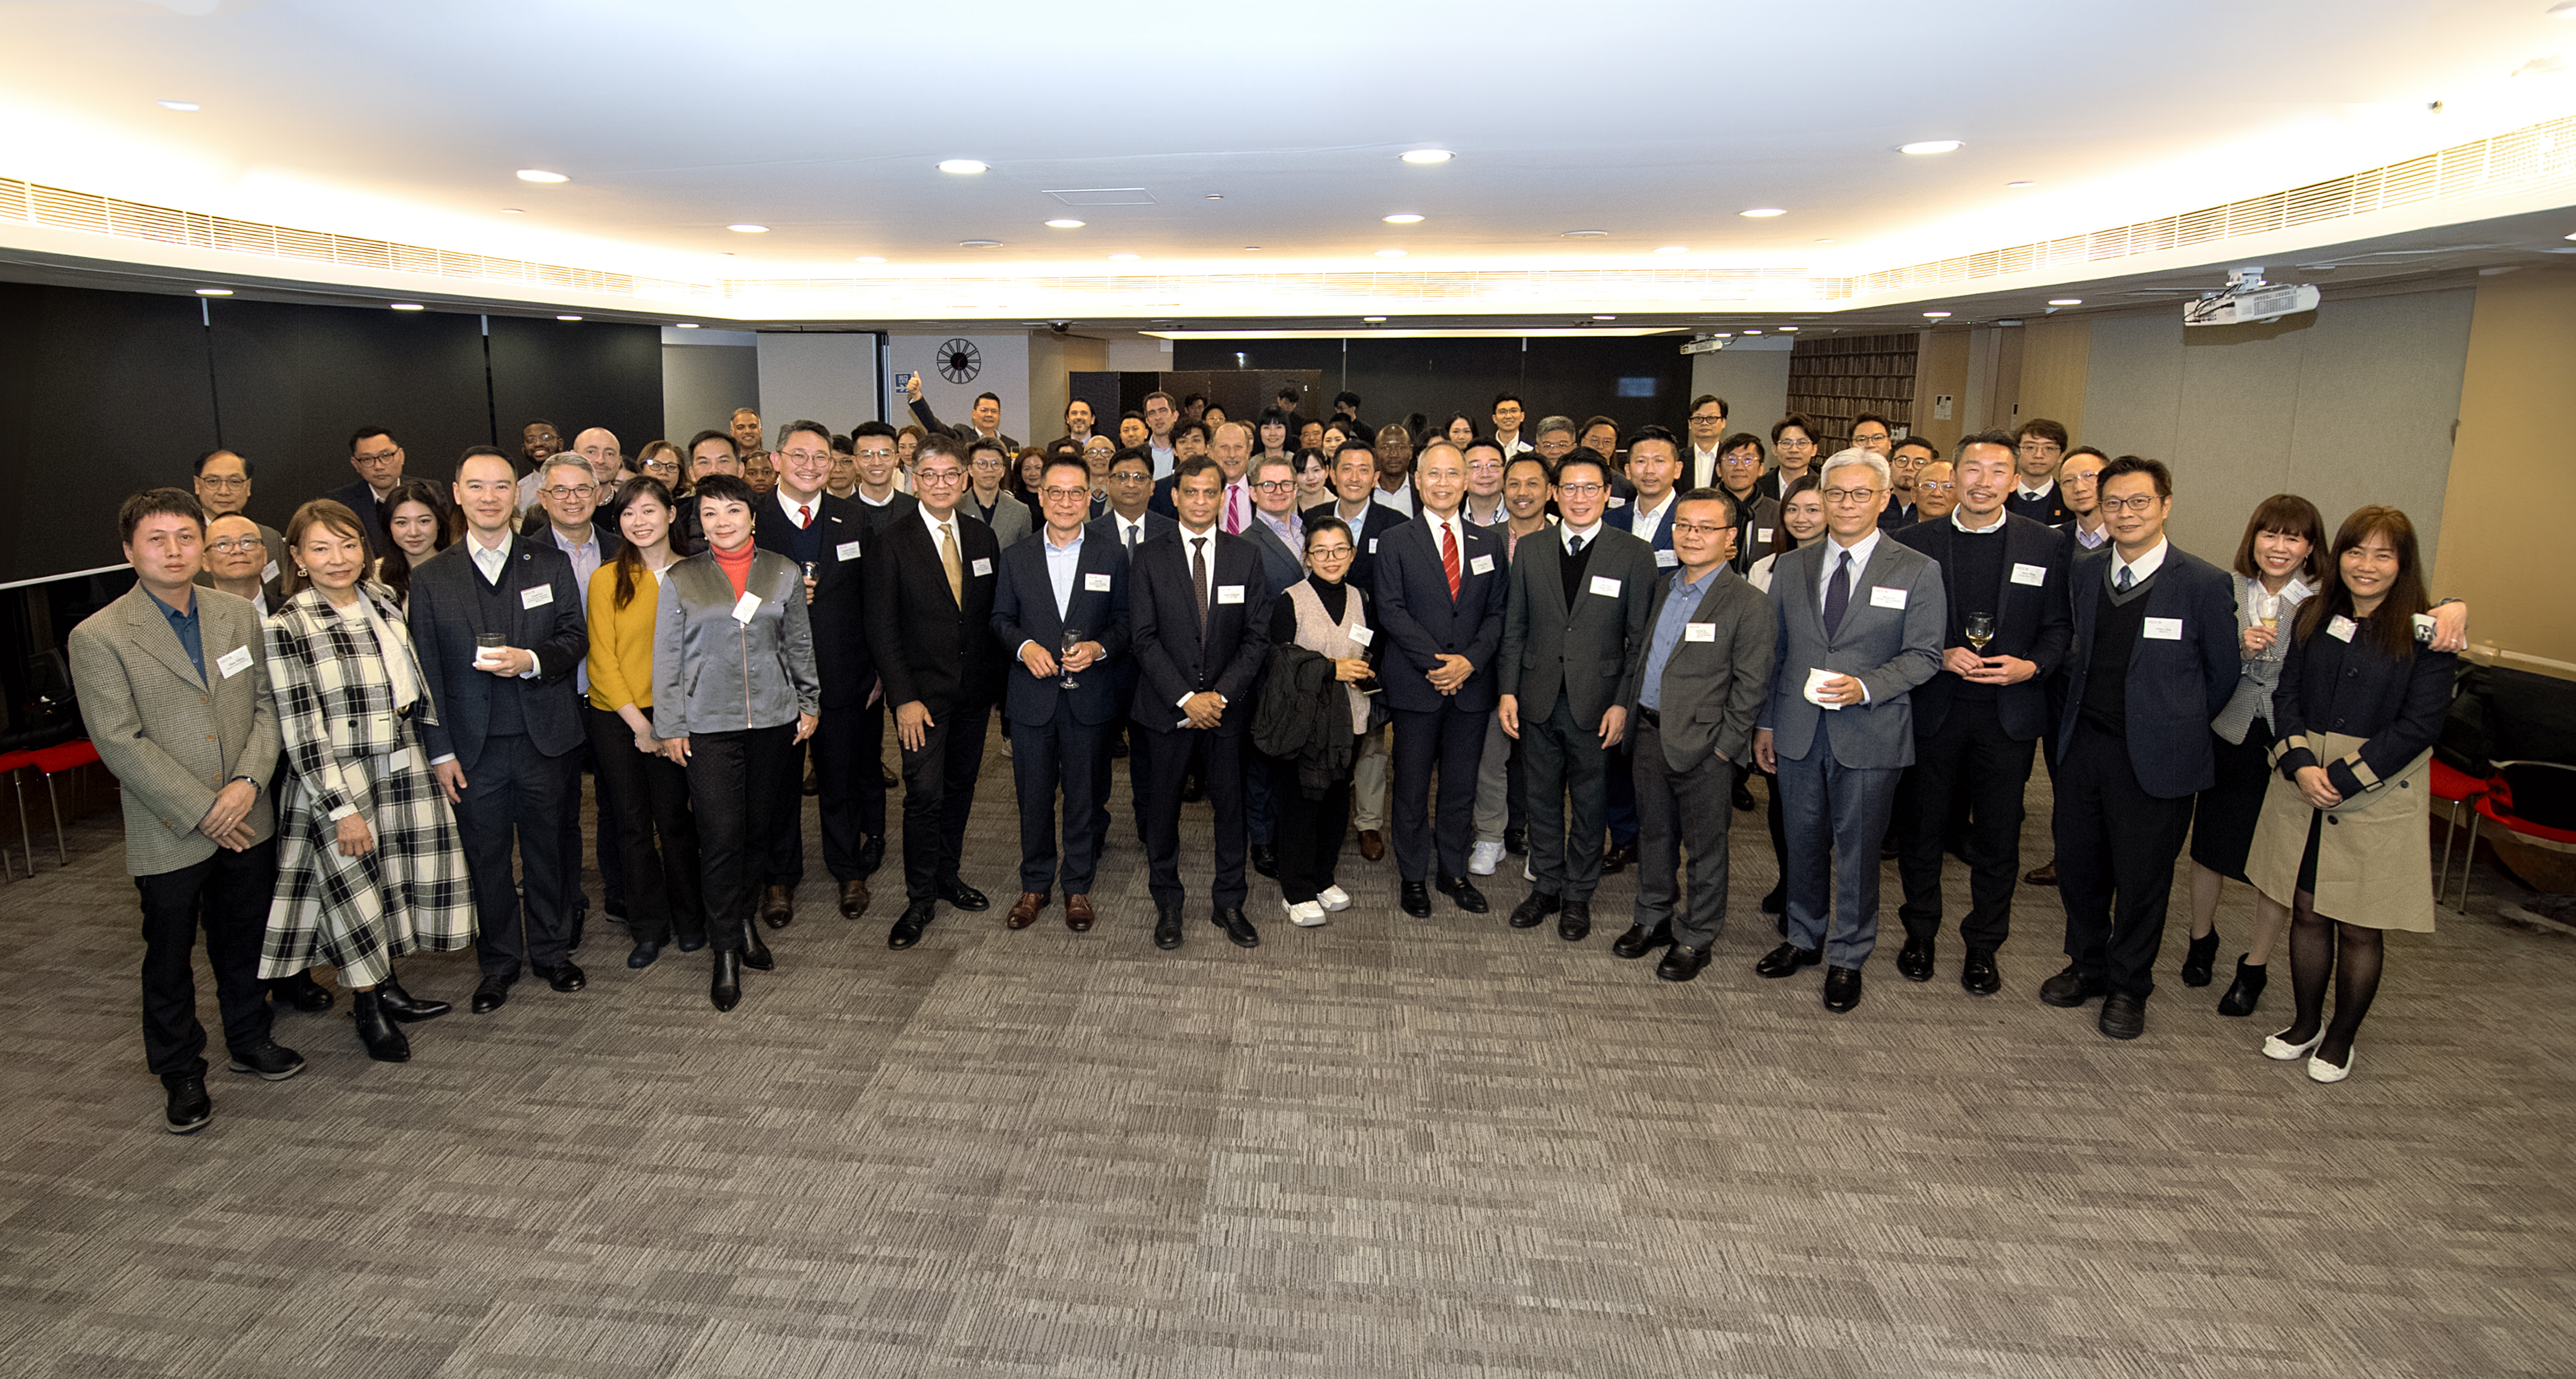 It was wonderful to see nearly 100 members as well as our Committee leaders at our Members Welcoming Reception on 30 January!